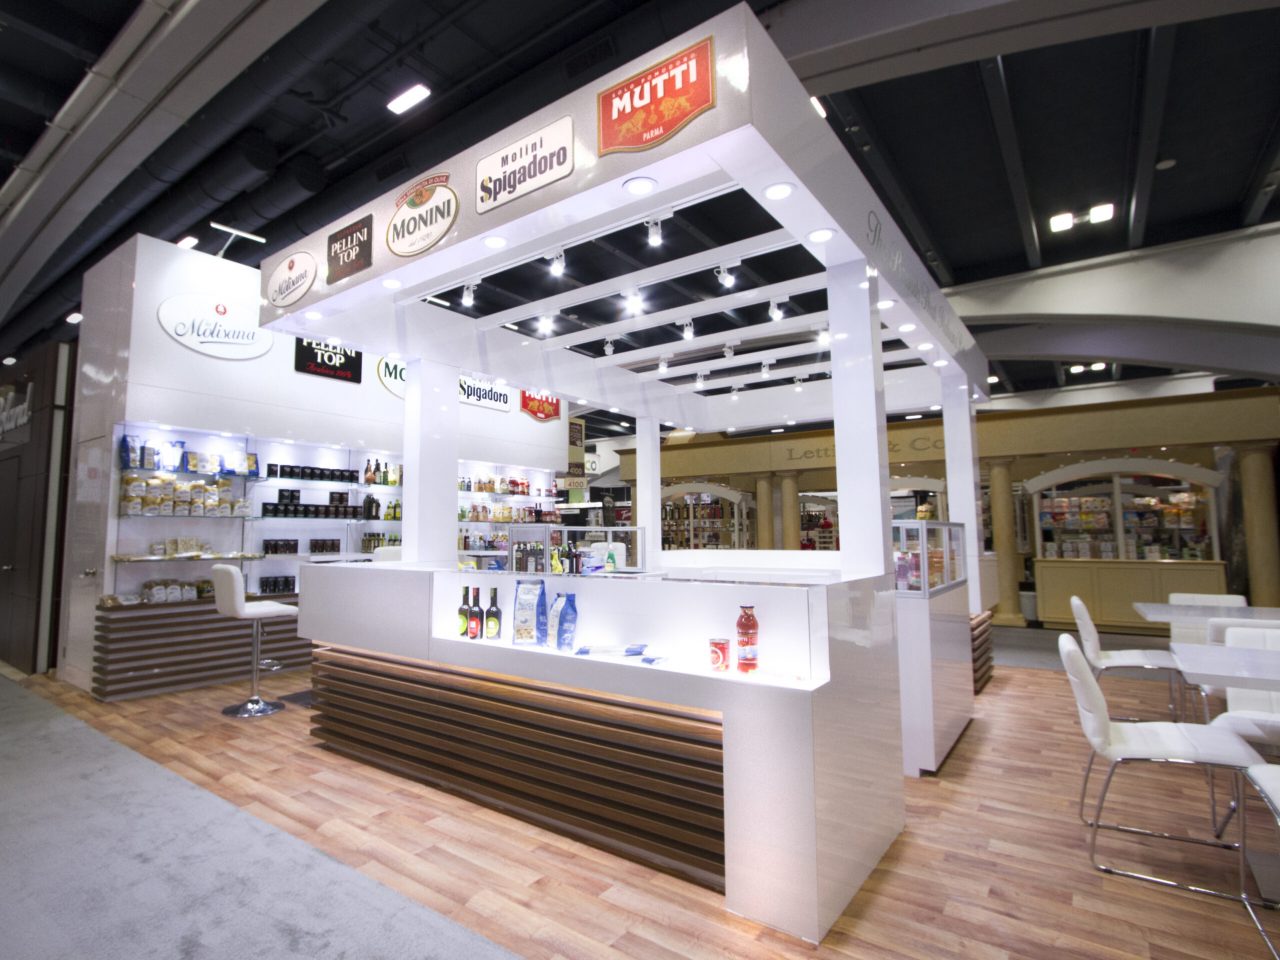 Wide Angle Side View of Monini's Custom Exhibit at the Fancy Food Shows